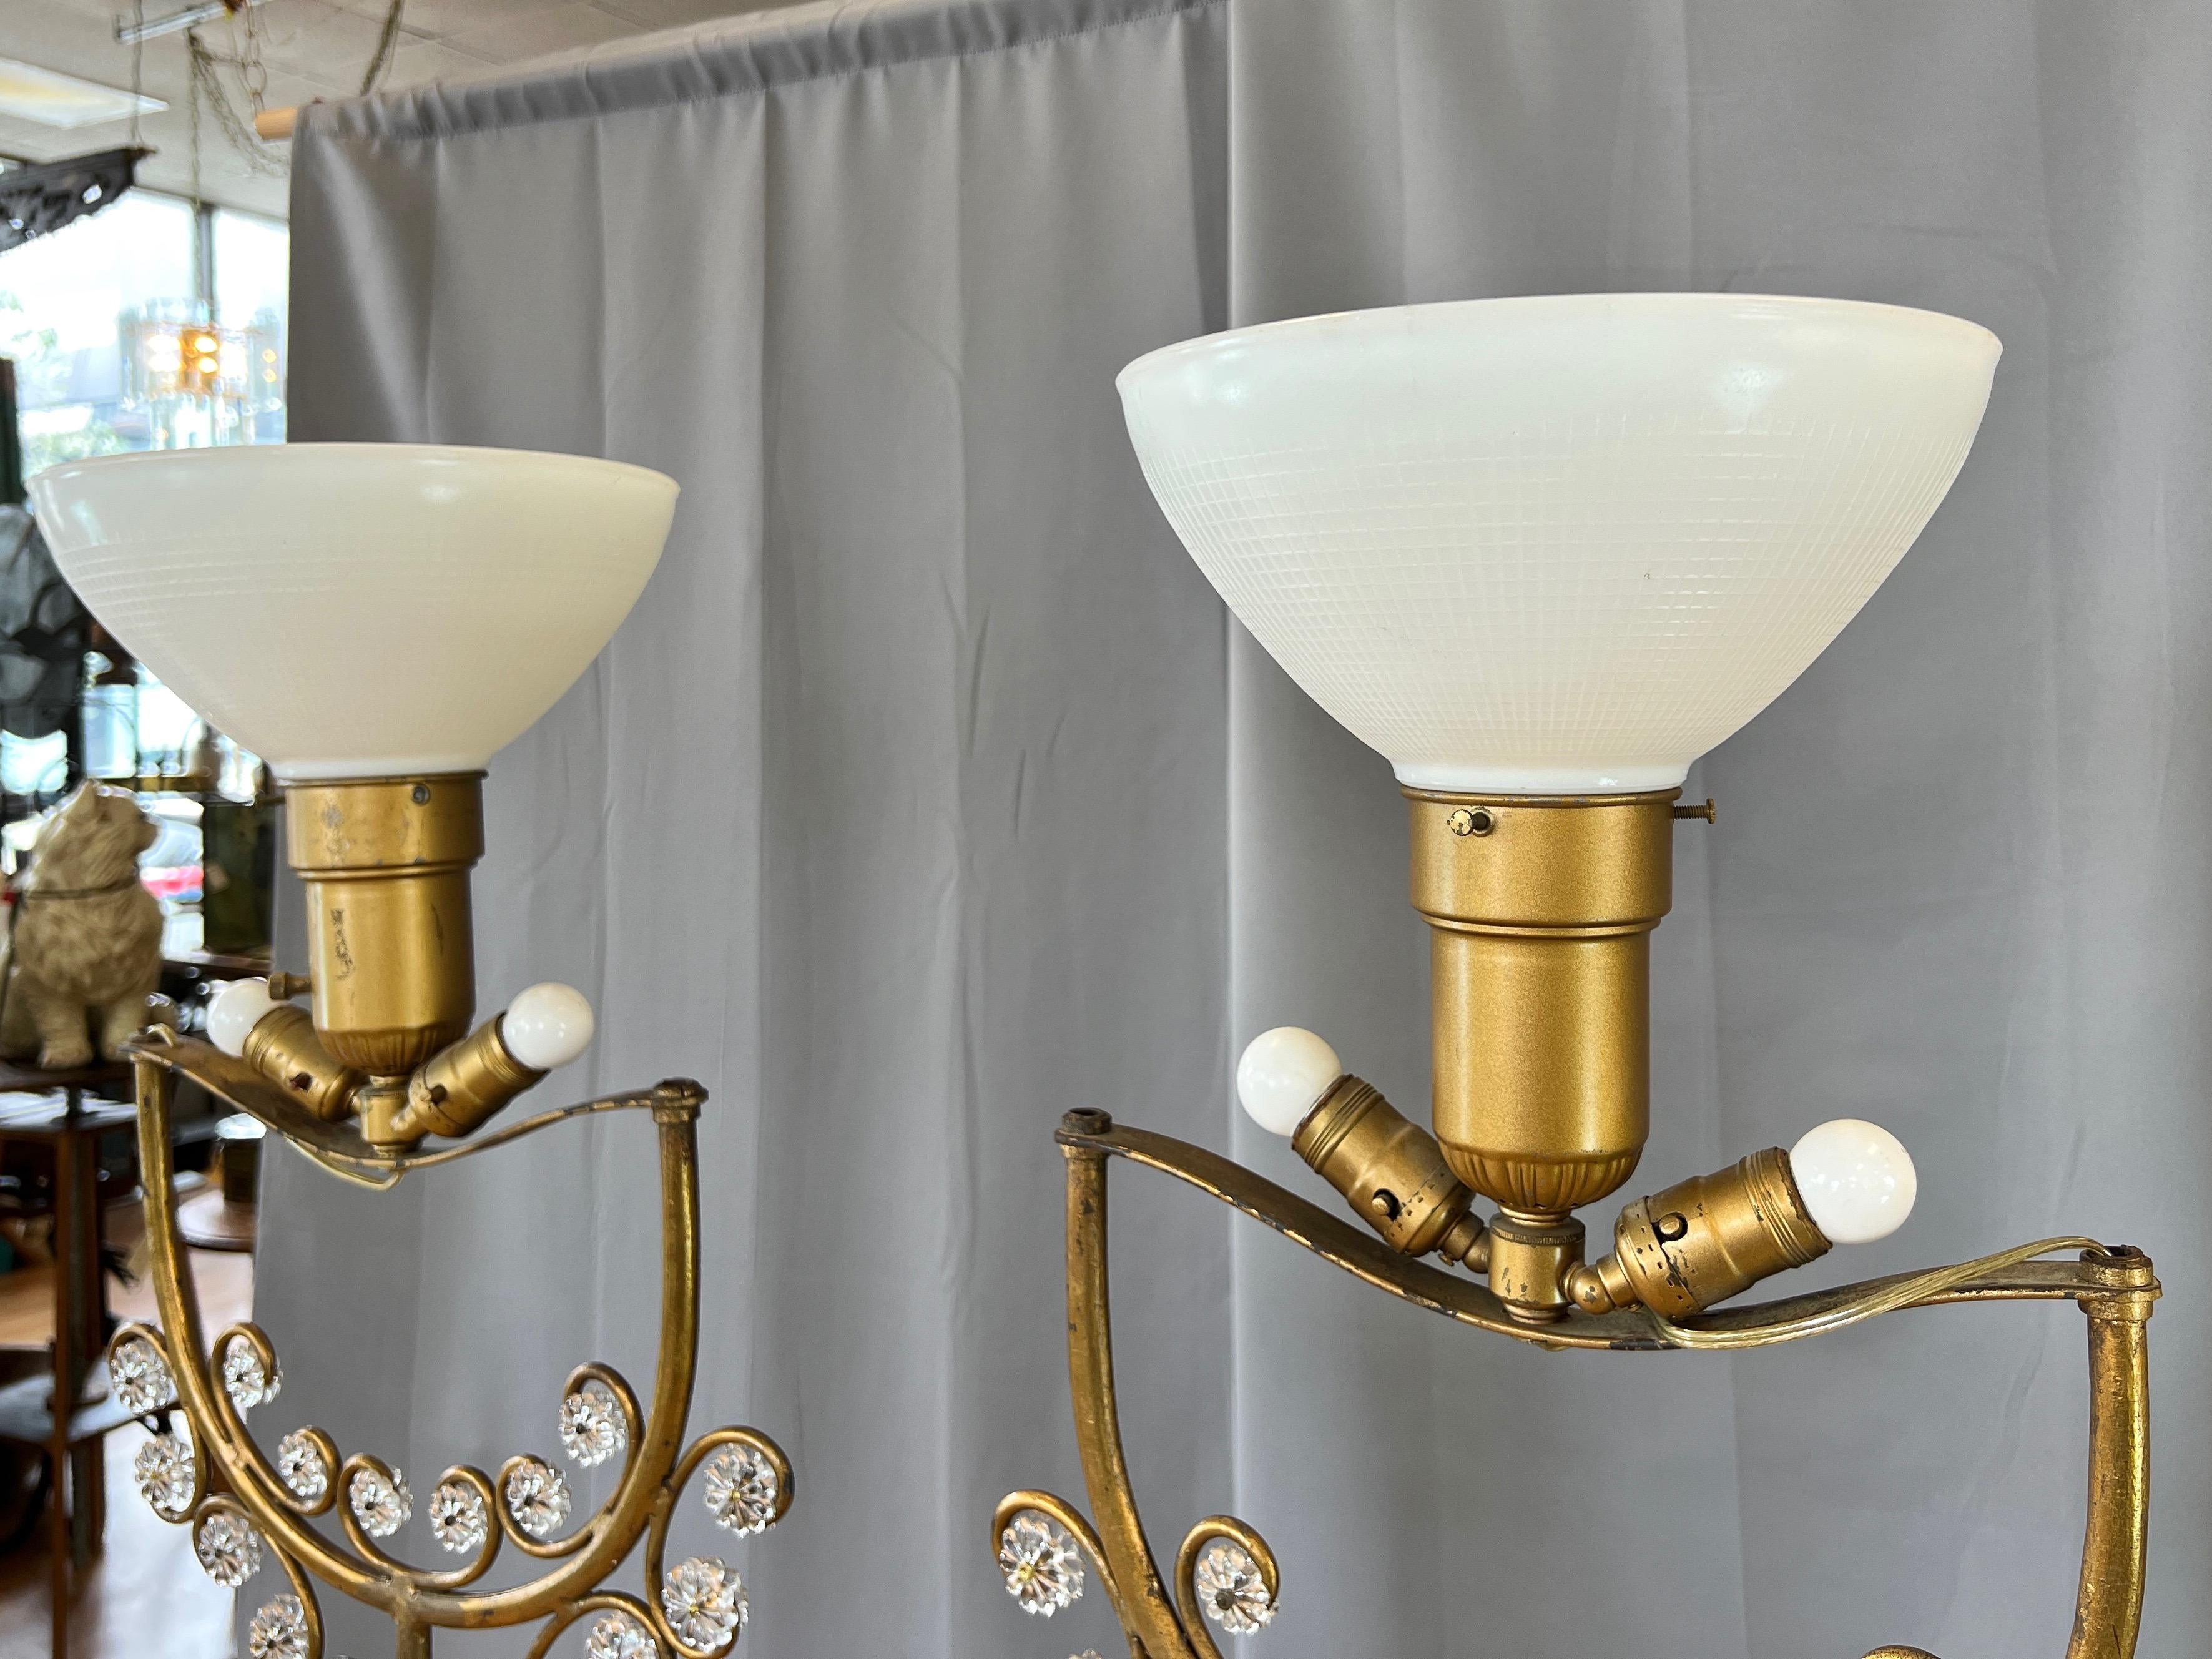 Pair of Italian Gilt Wrought Iron Floor Lamps with Glass Florets & Leaves, 1950s For Sale 11